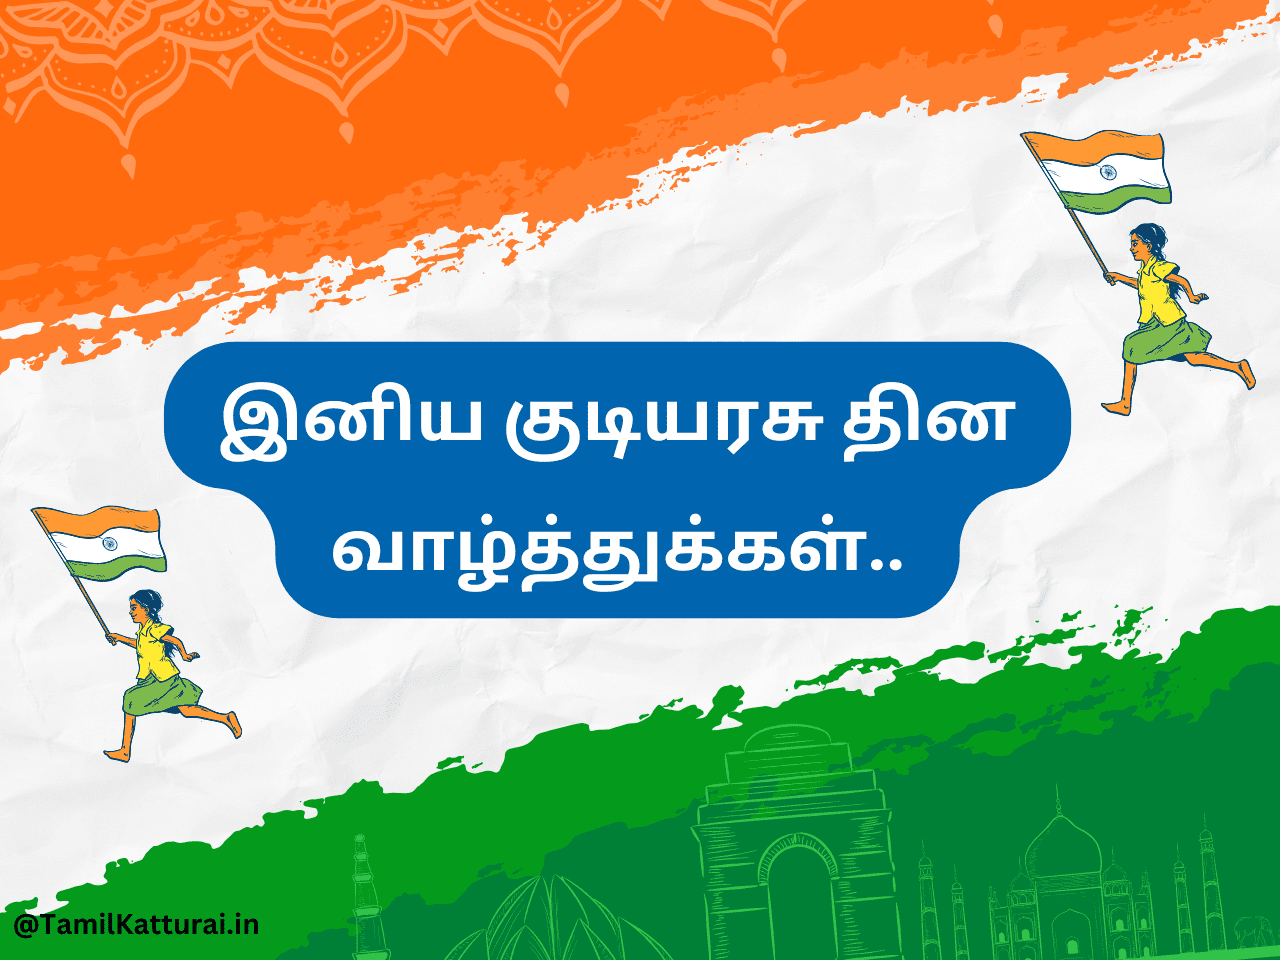 Republic day wishes in tamil